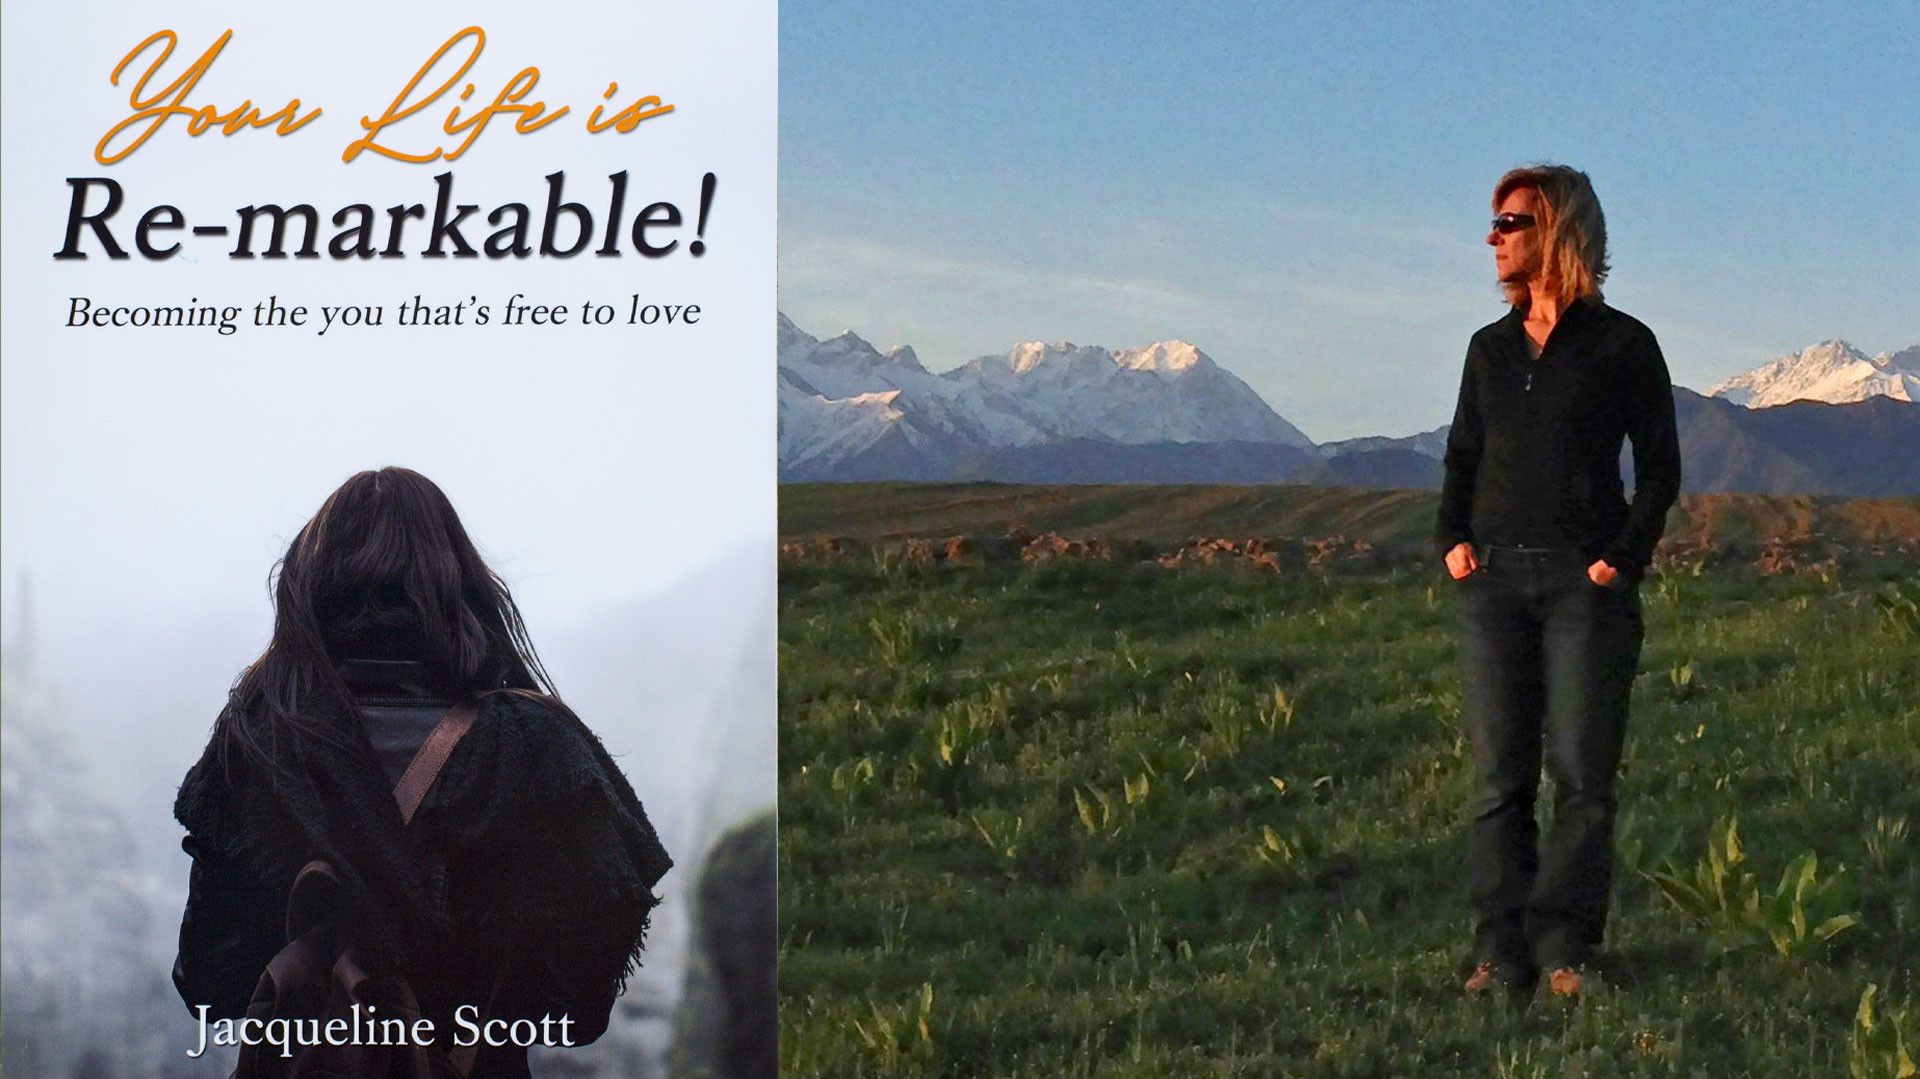 Your Life is Re-markable! – Interview with Jackie Scott